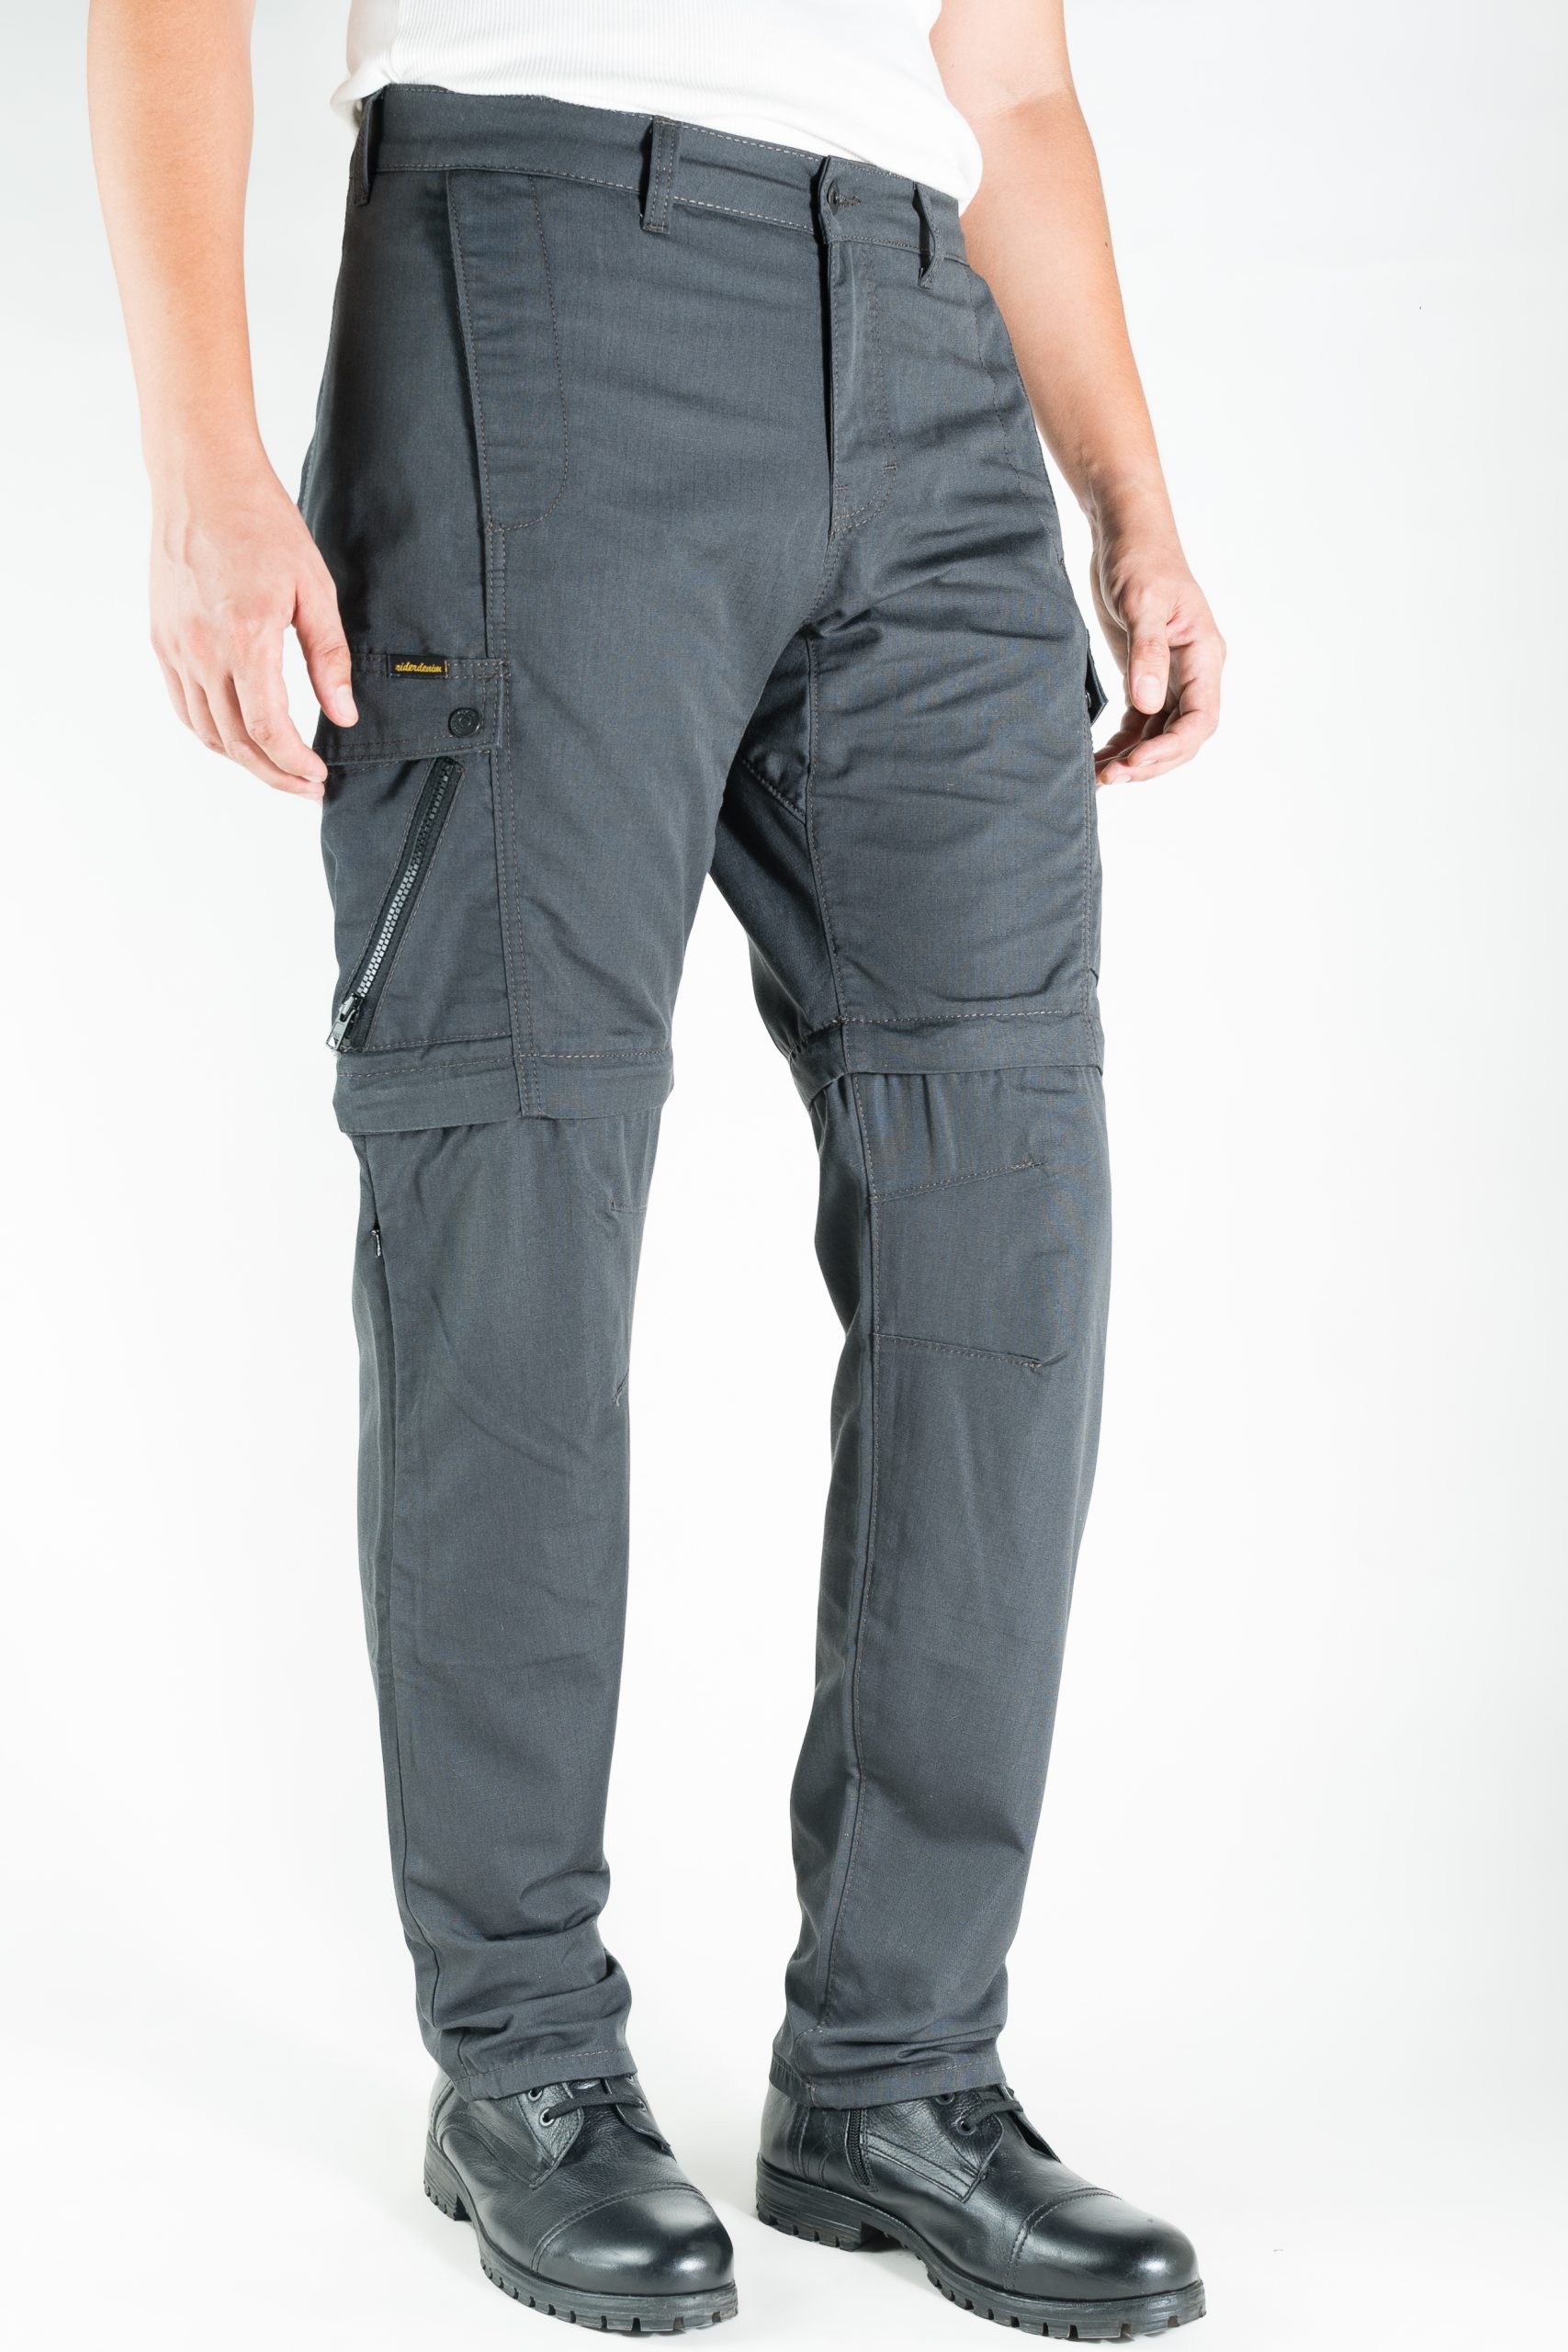 ALIZE – Motorcycle Zip off Trousers